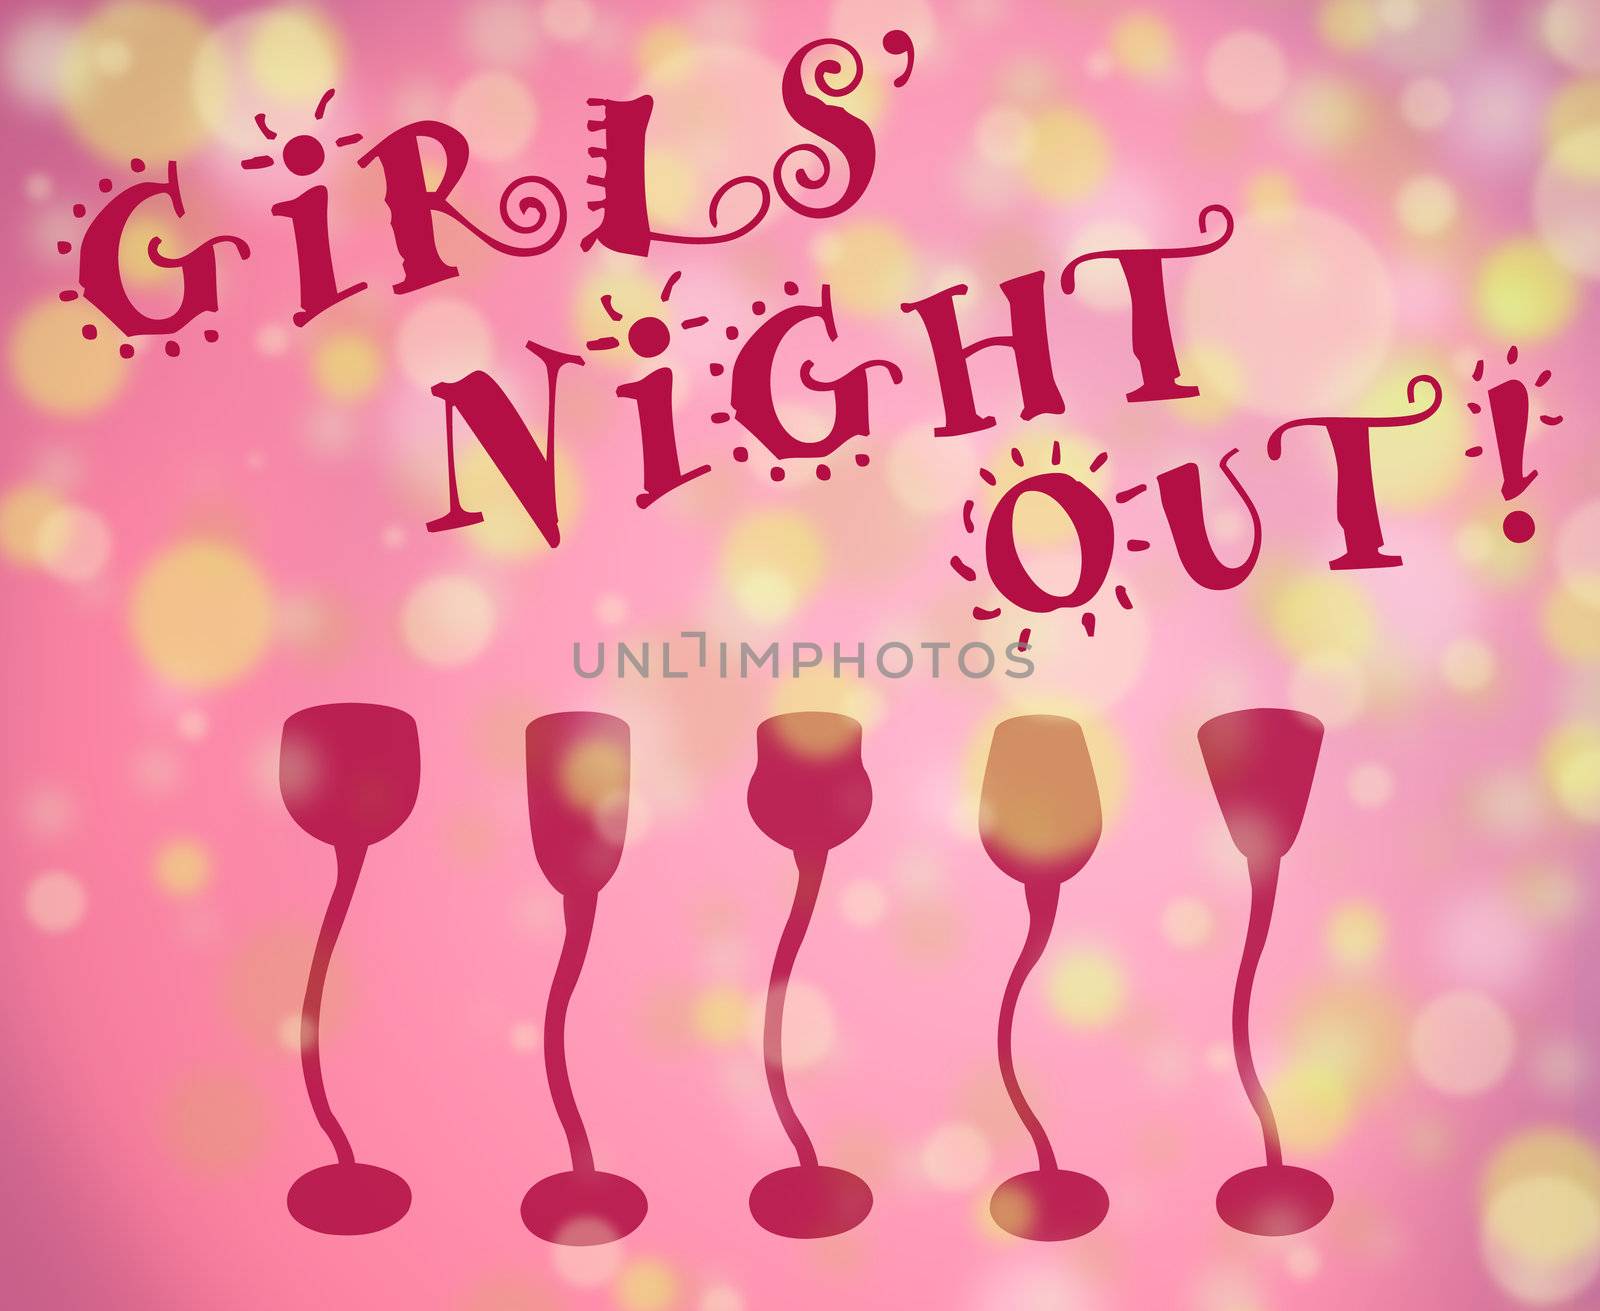 Girls night out fun type with light filled background and row of cocktail glasses all in pink shades with golde lights